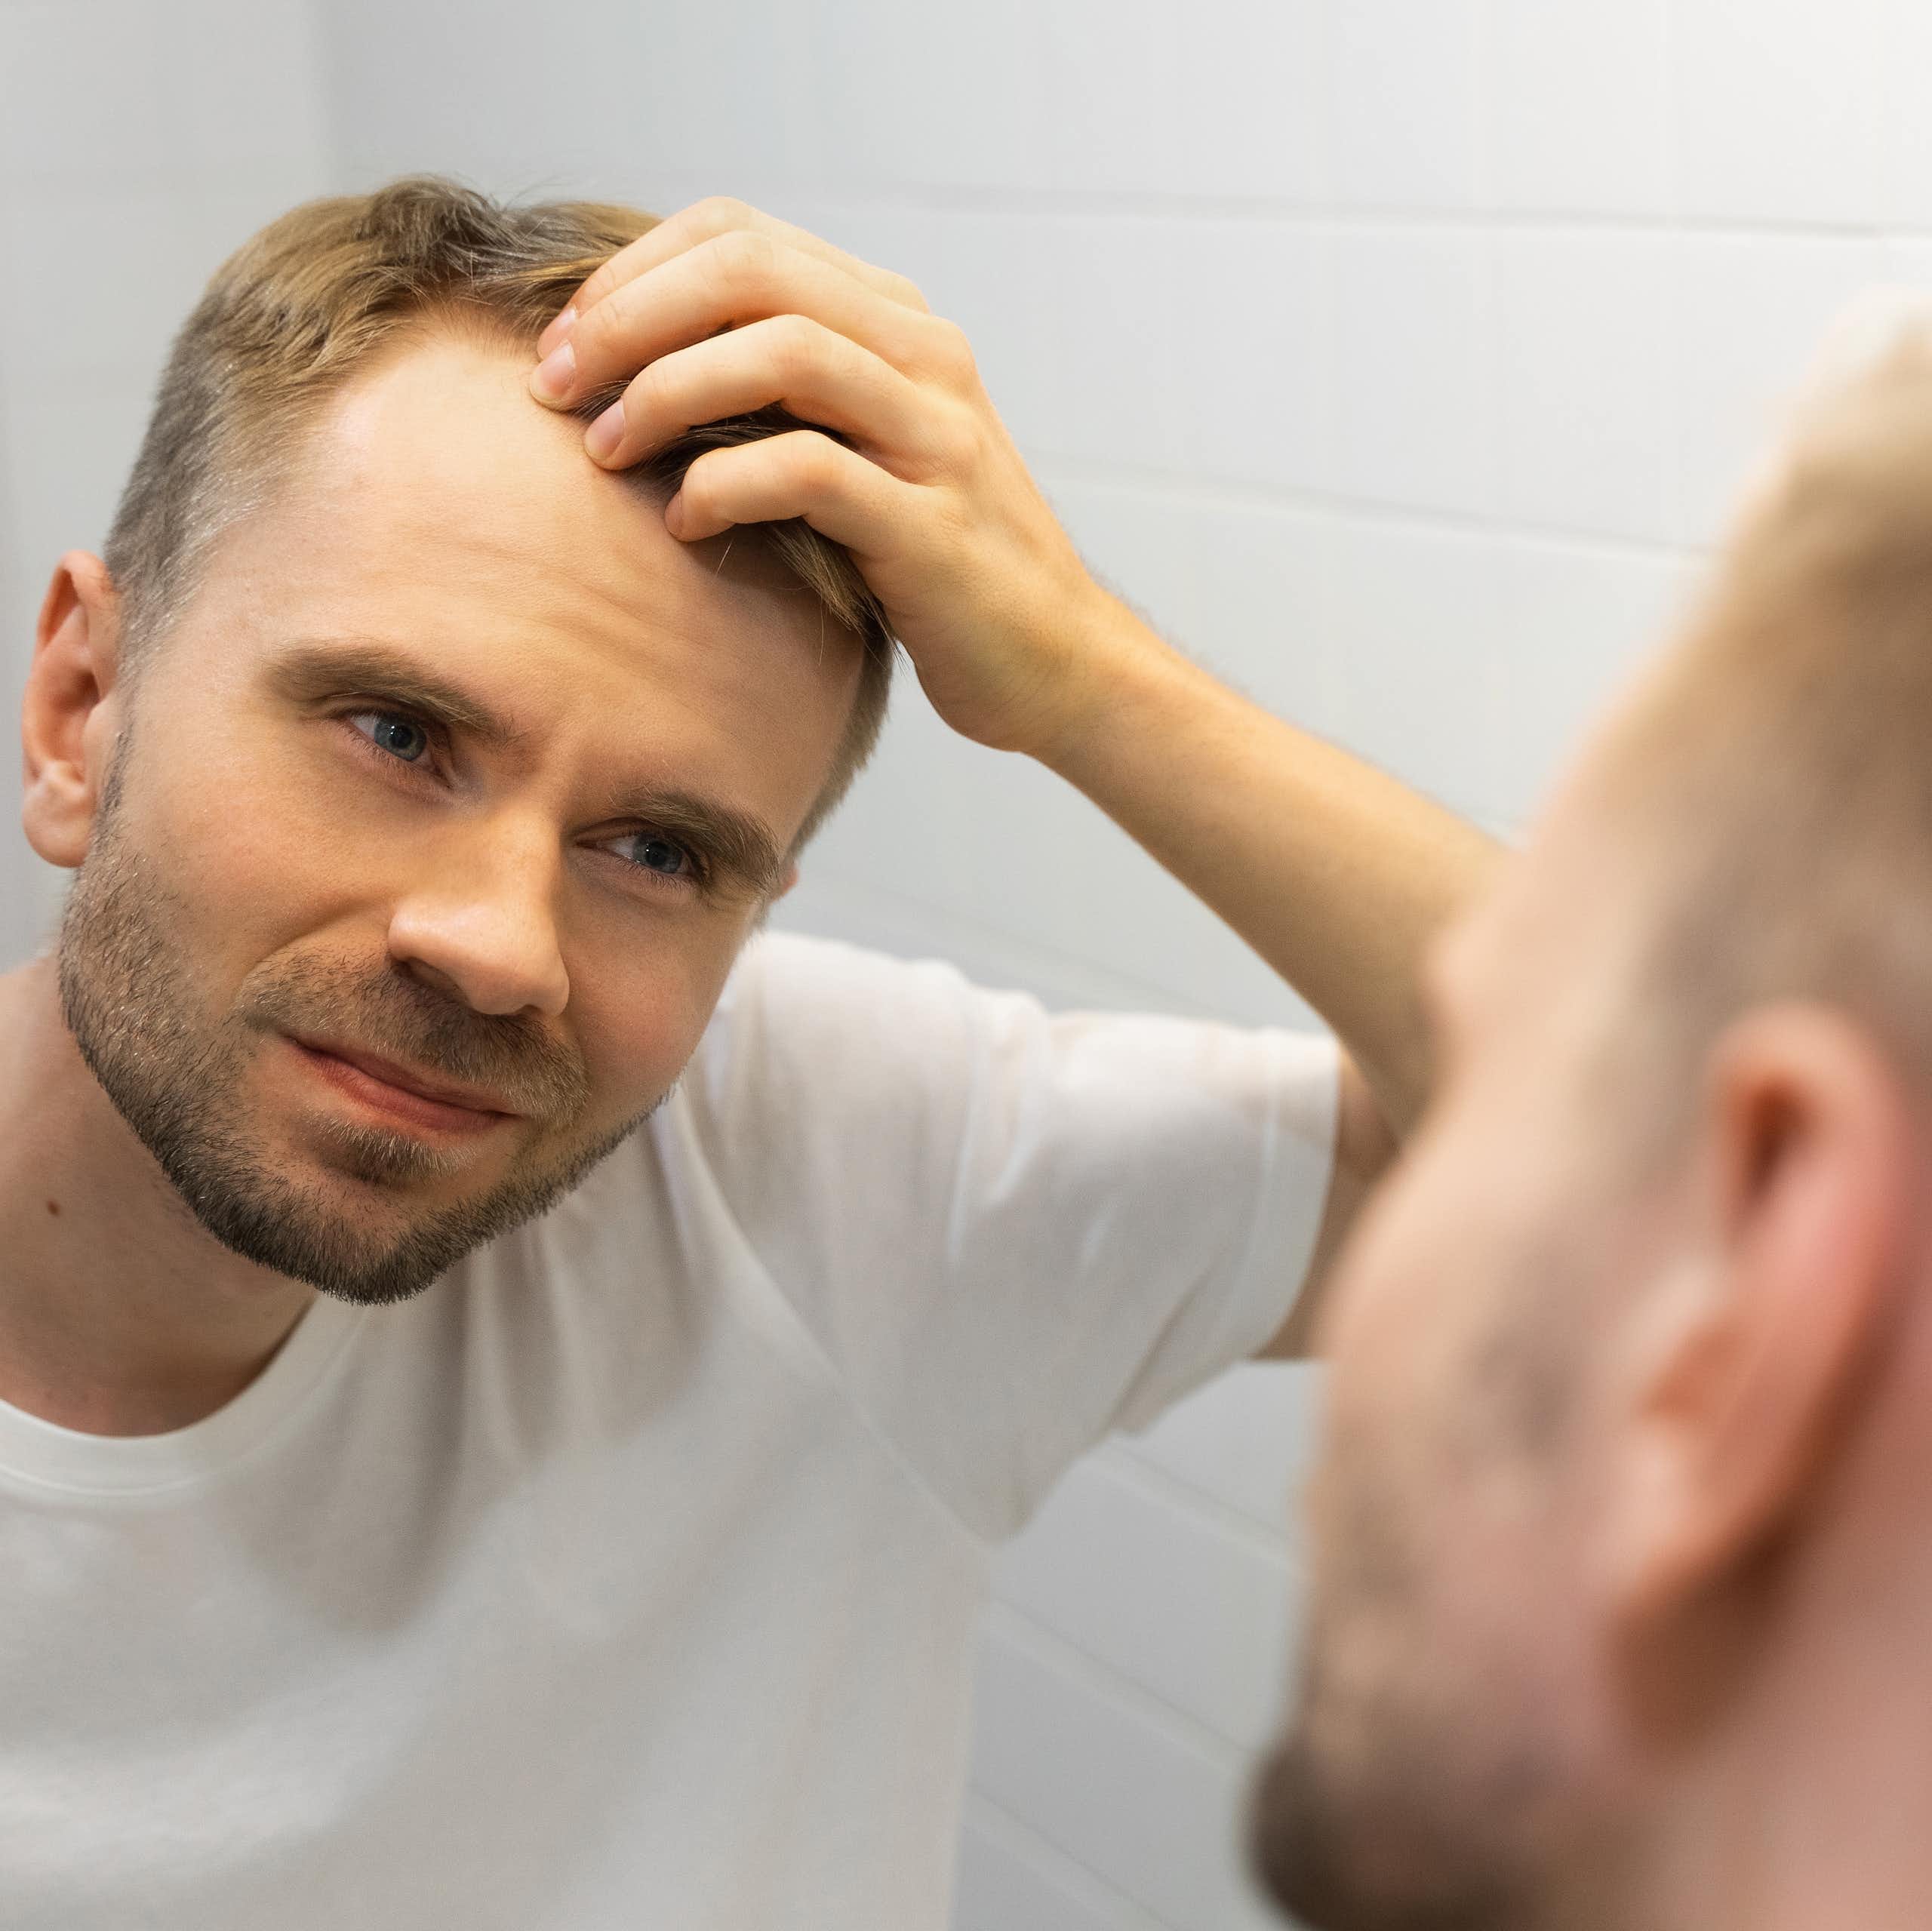 Male baldness is often trivialised – our research shows it should be taken seriously